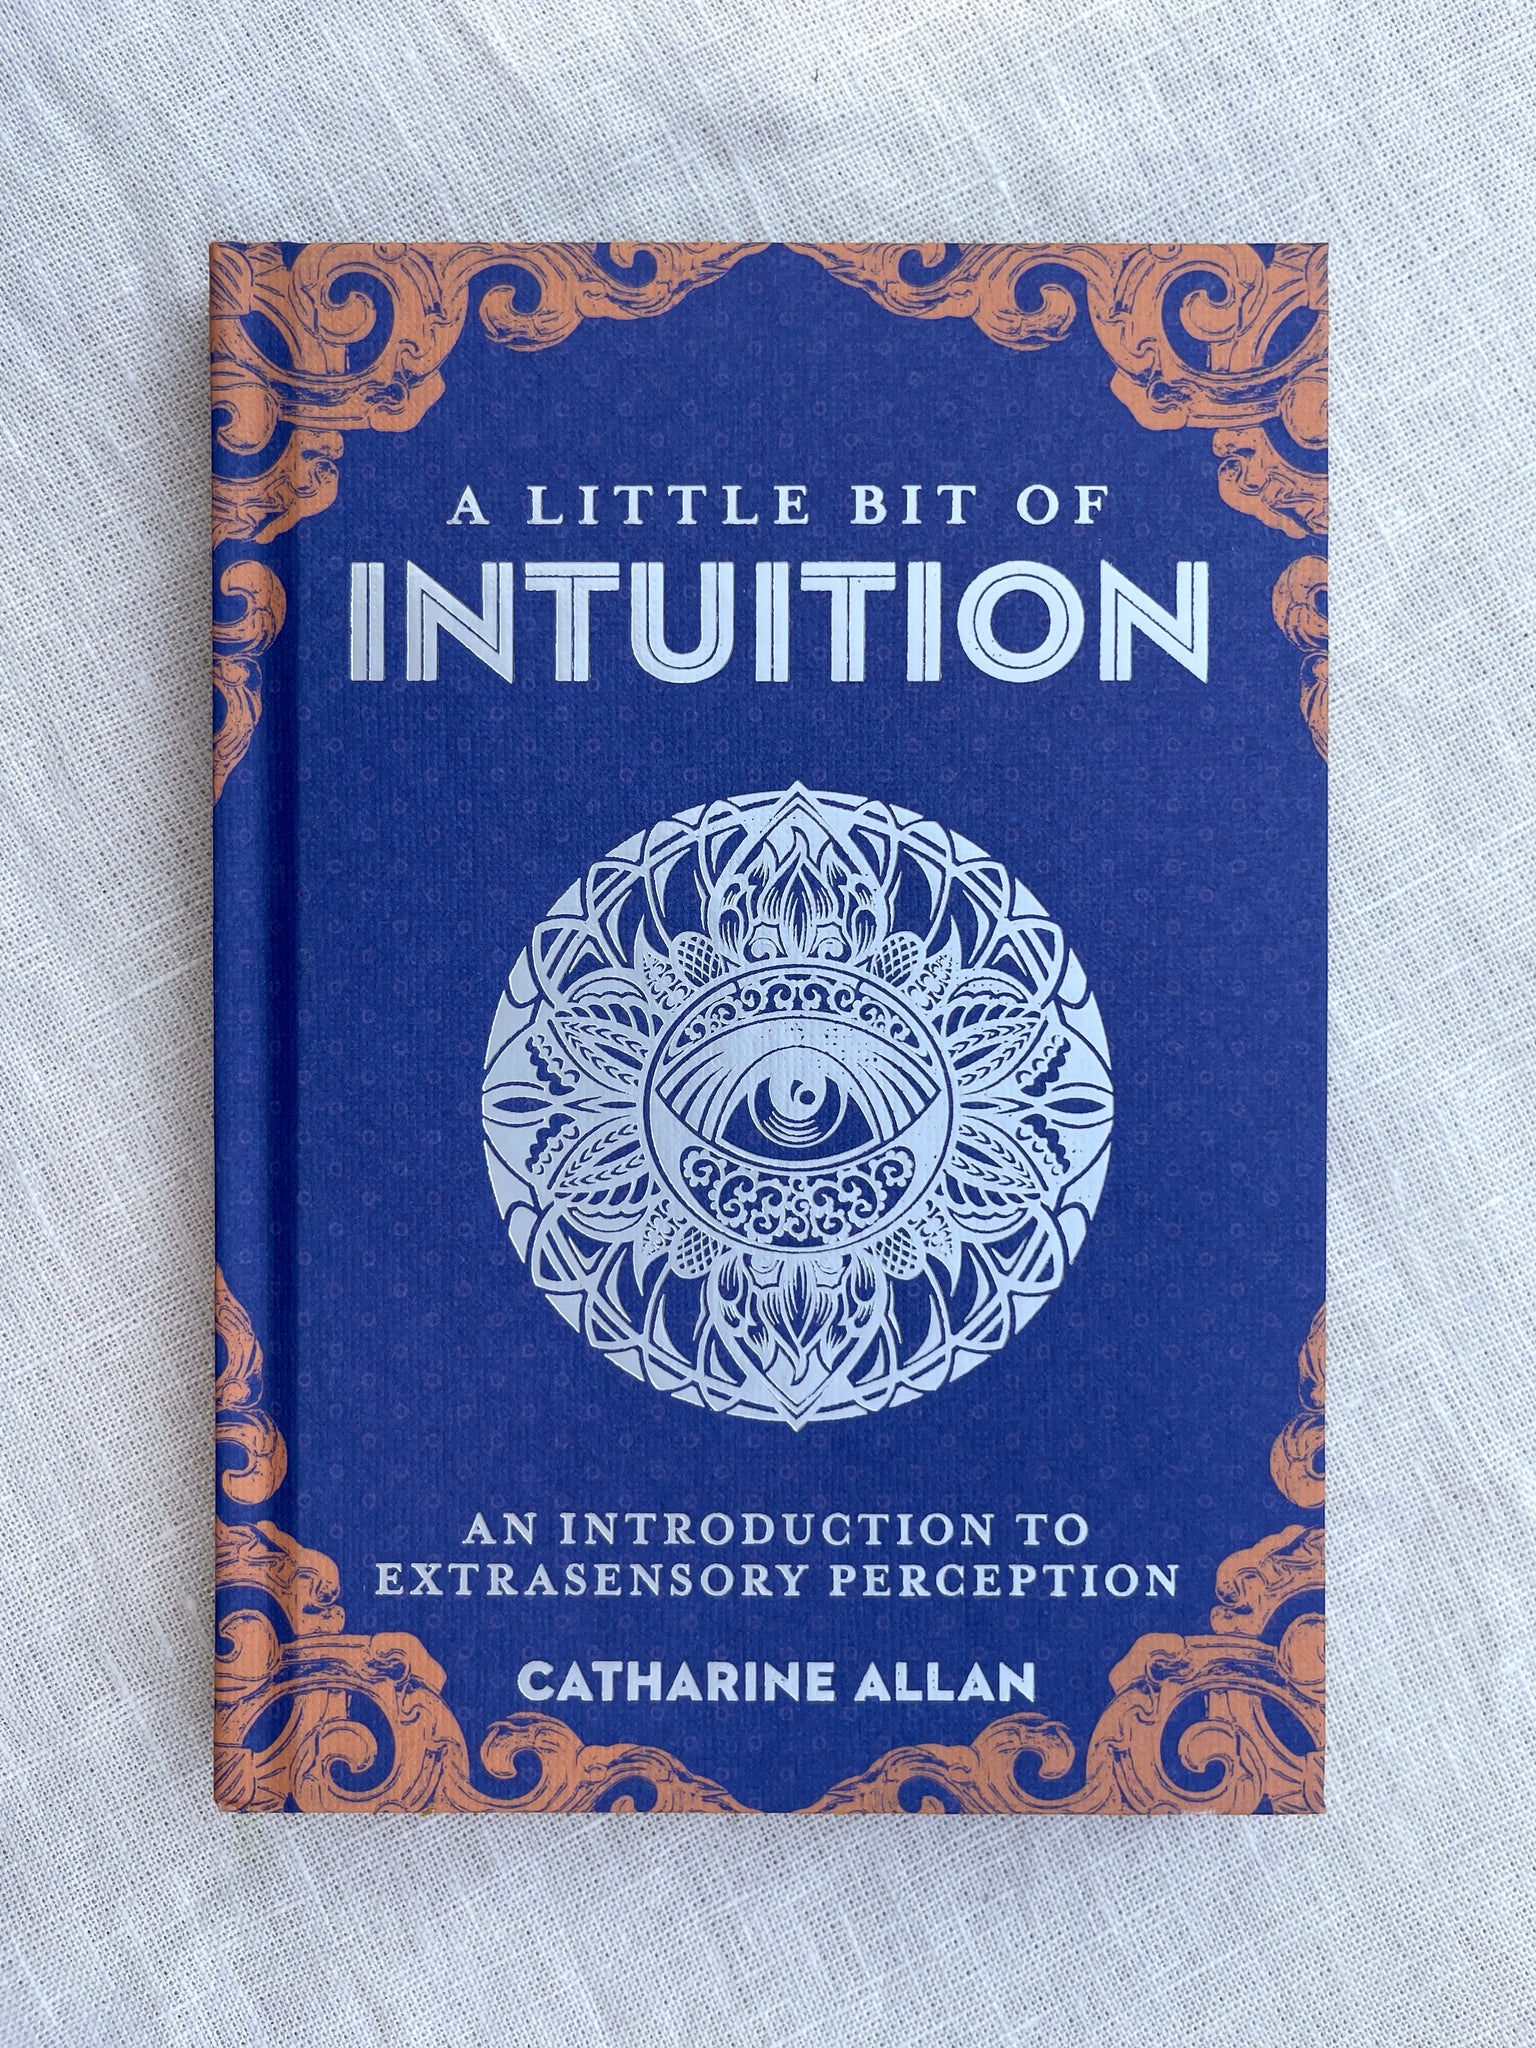 A Little Bit of Intuition book an introduction to extrasensory perception by catherine allan